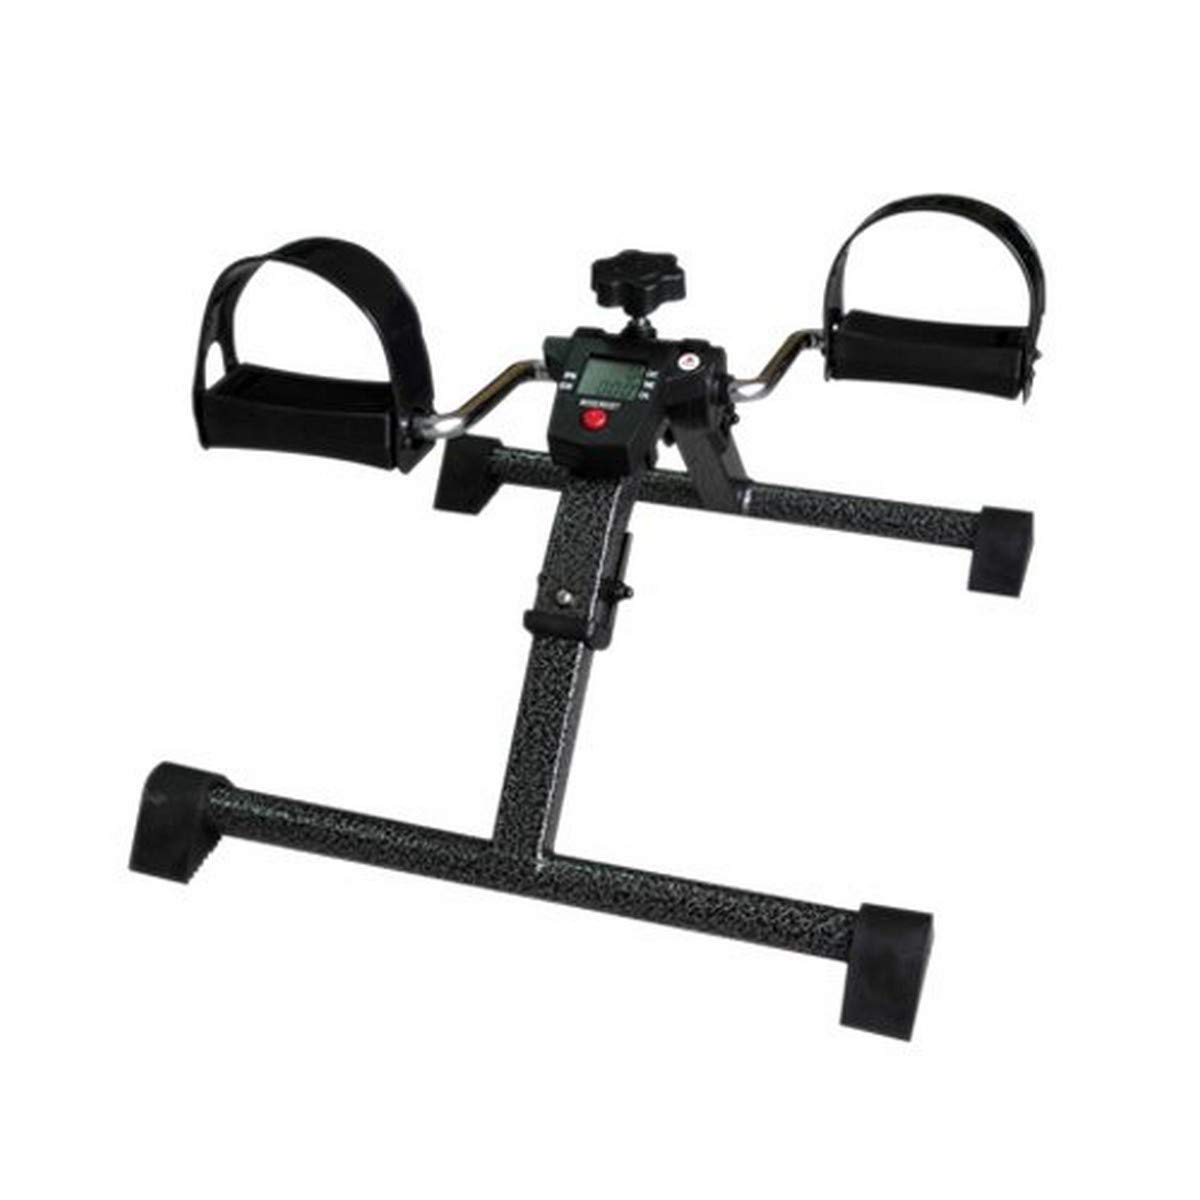 CanDo Pedal Exerciser with Digital Display, Fold-up